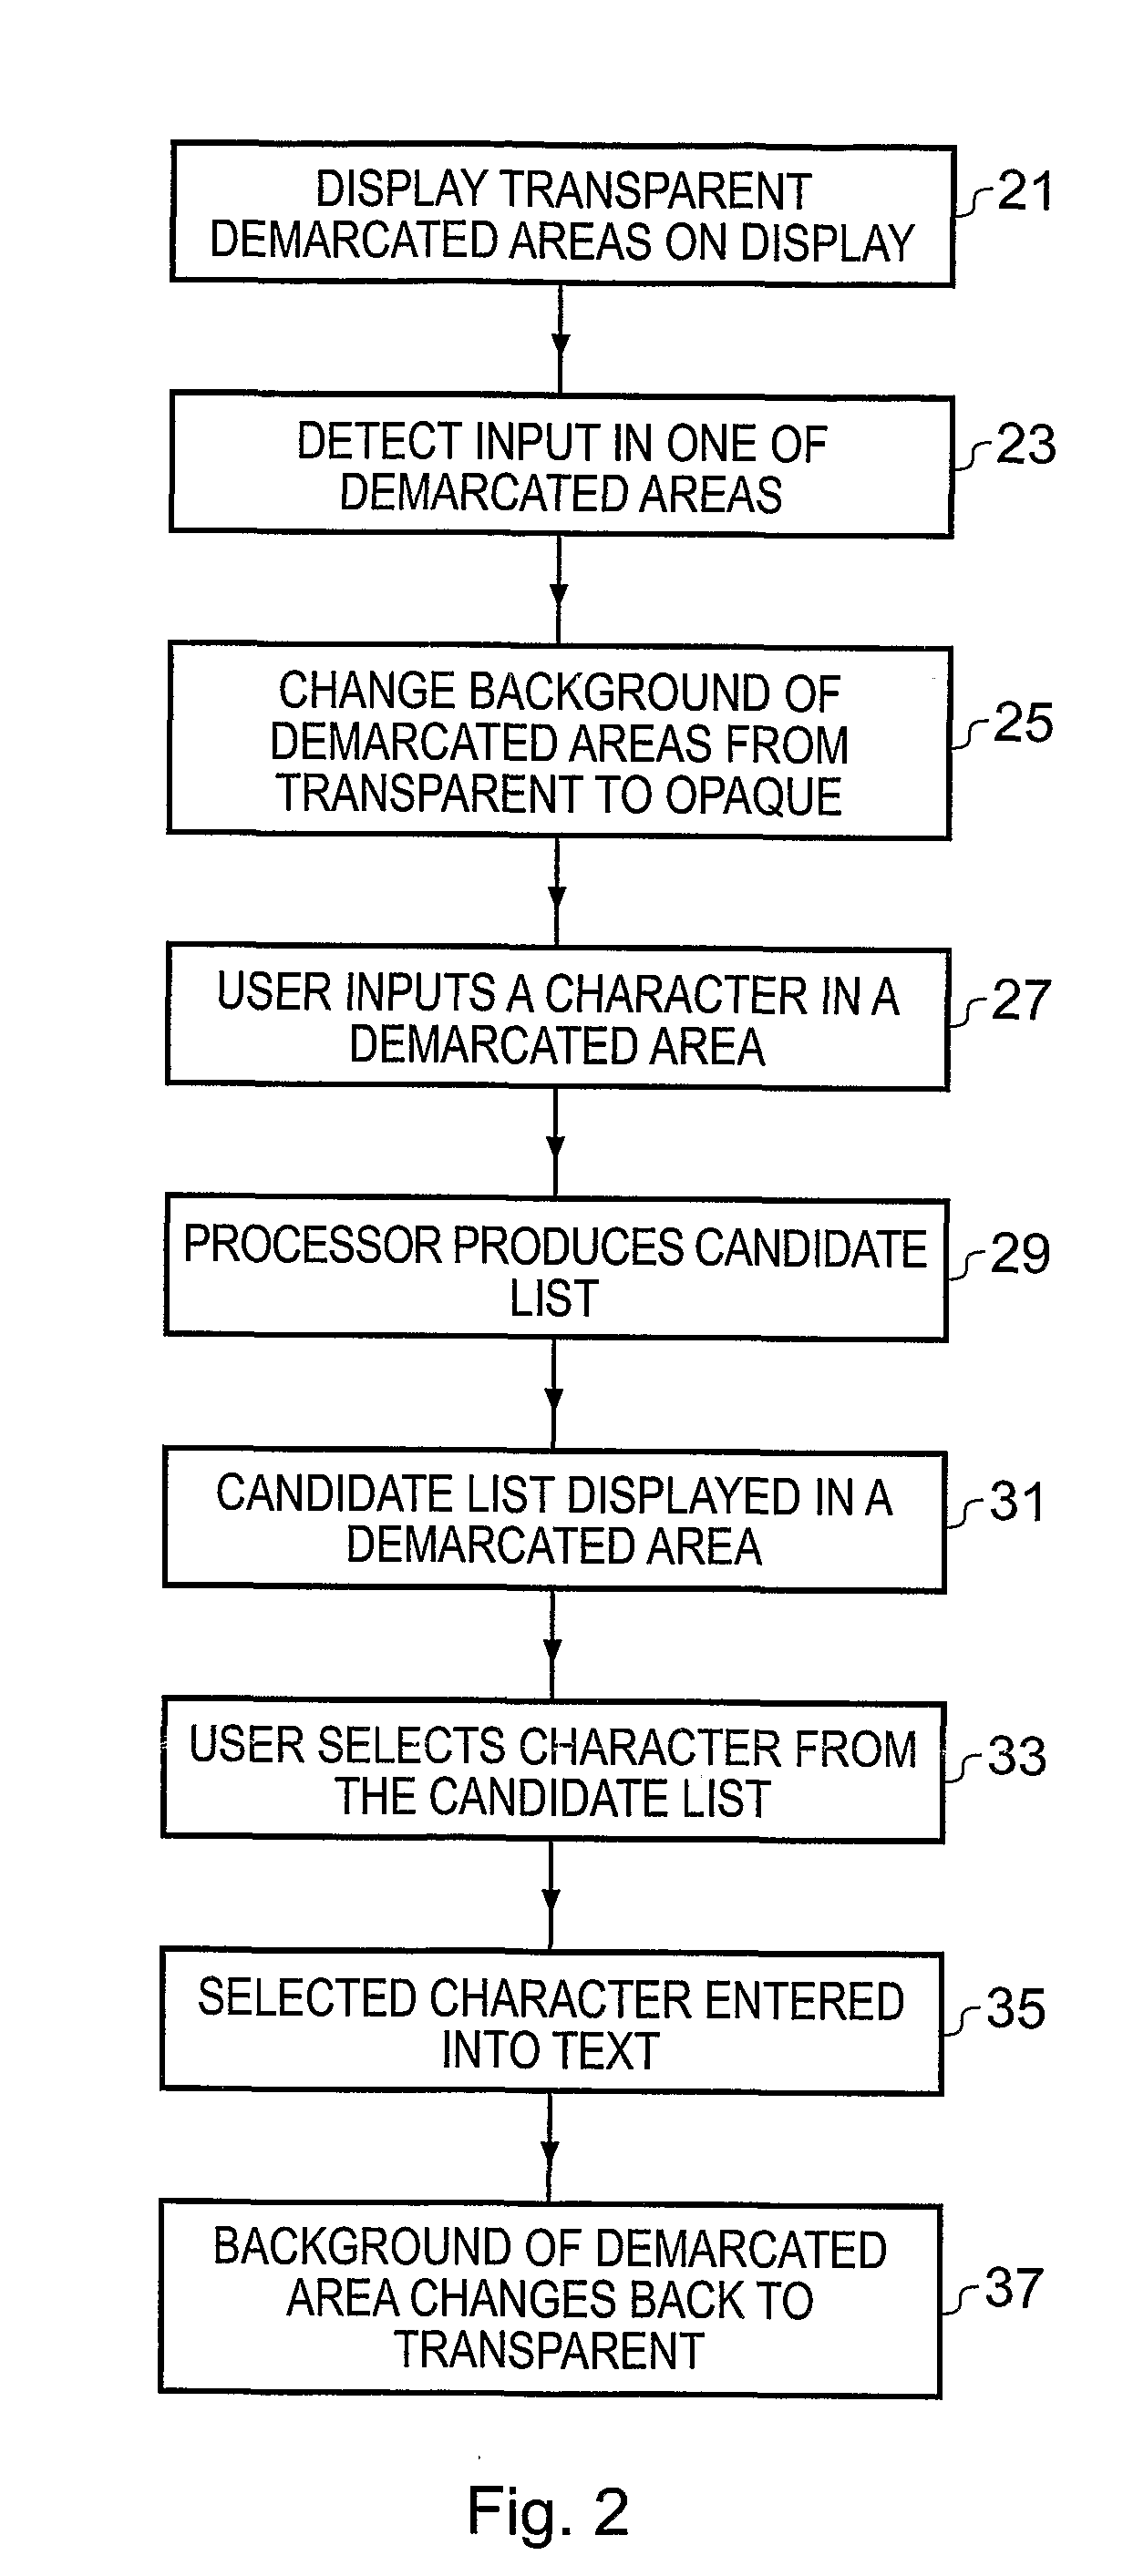 Text Entry Into Electronic Devices